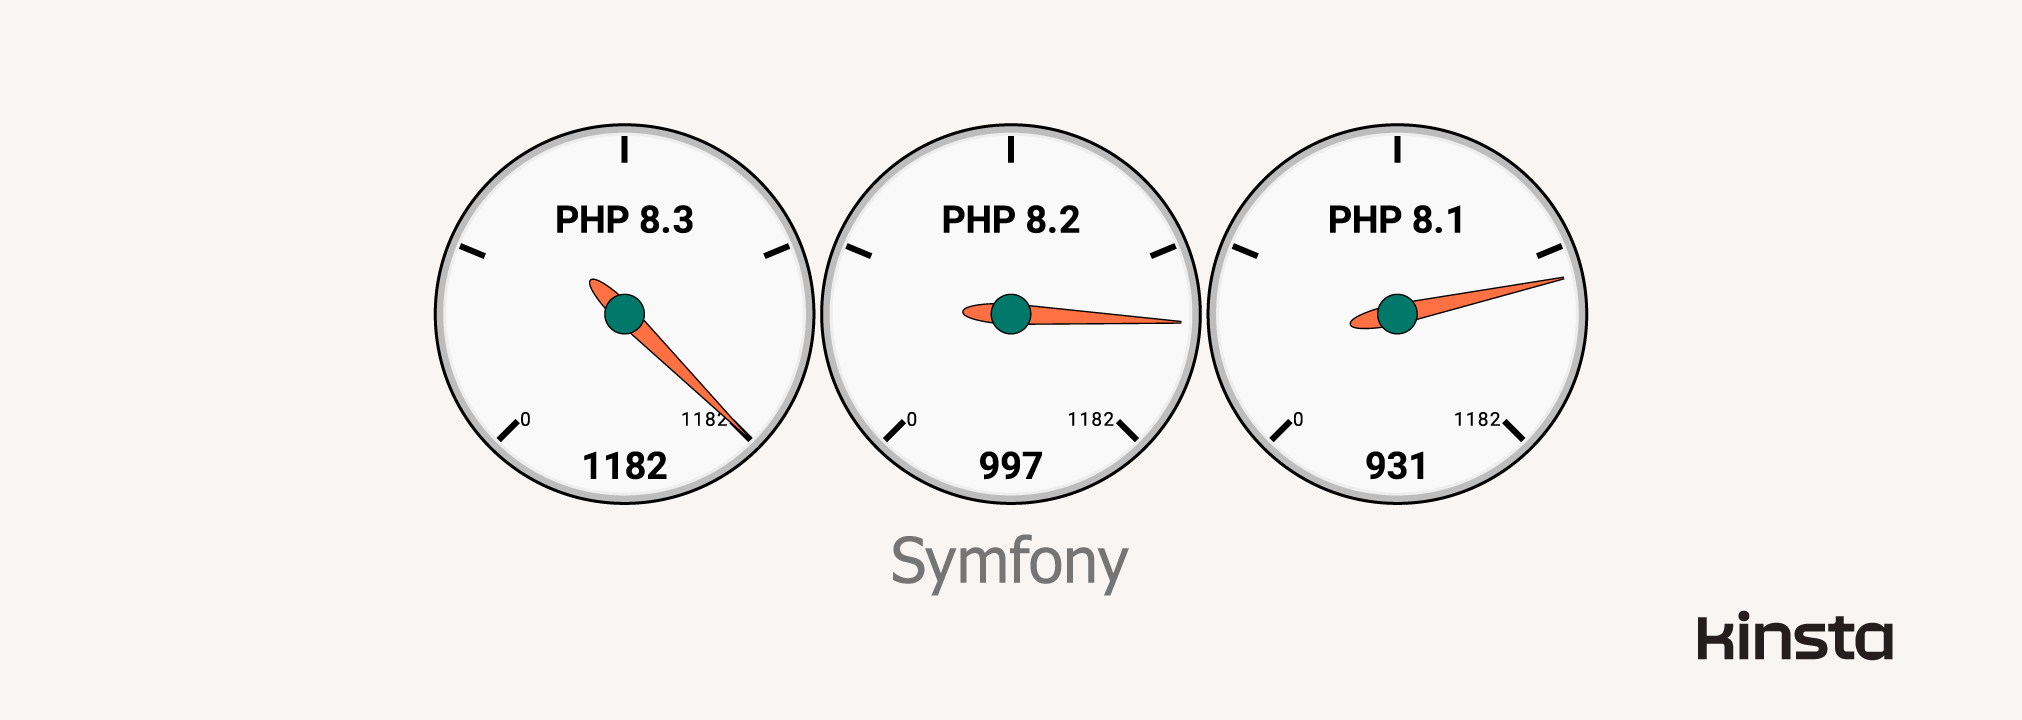 Symfony 6.3.0 performance on PHP 8.1, 8.2, and 8.3 (in requests/second).